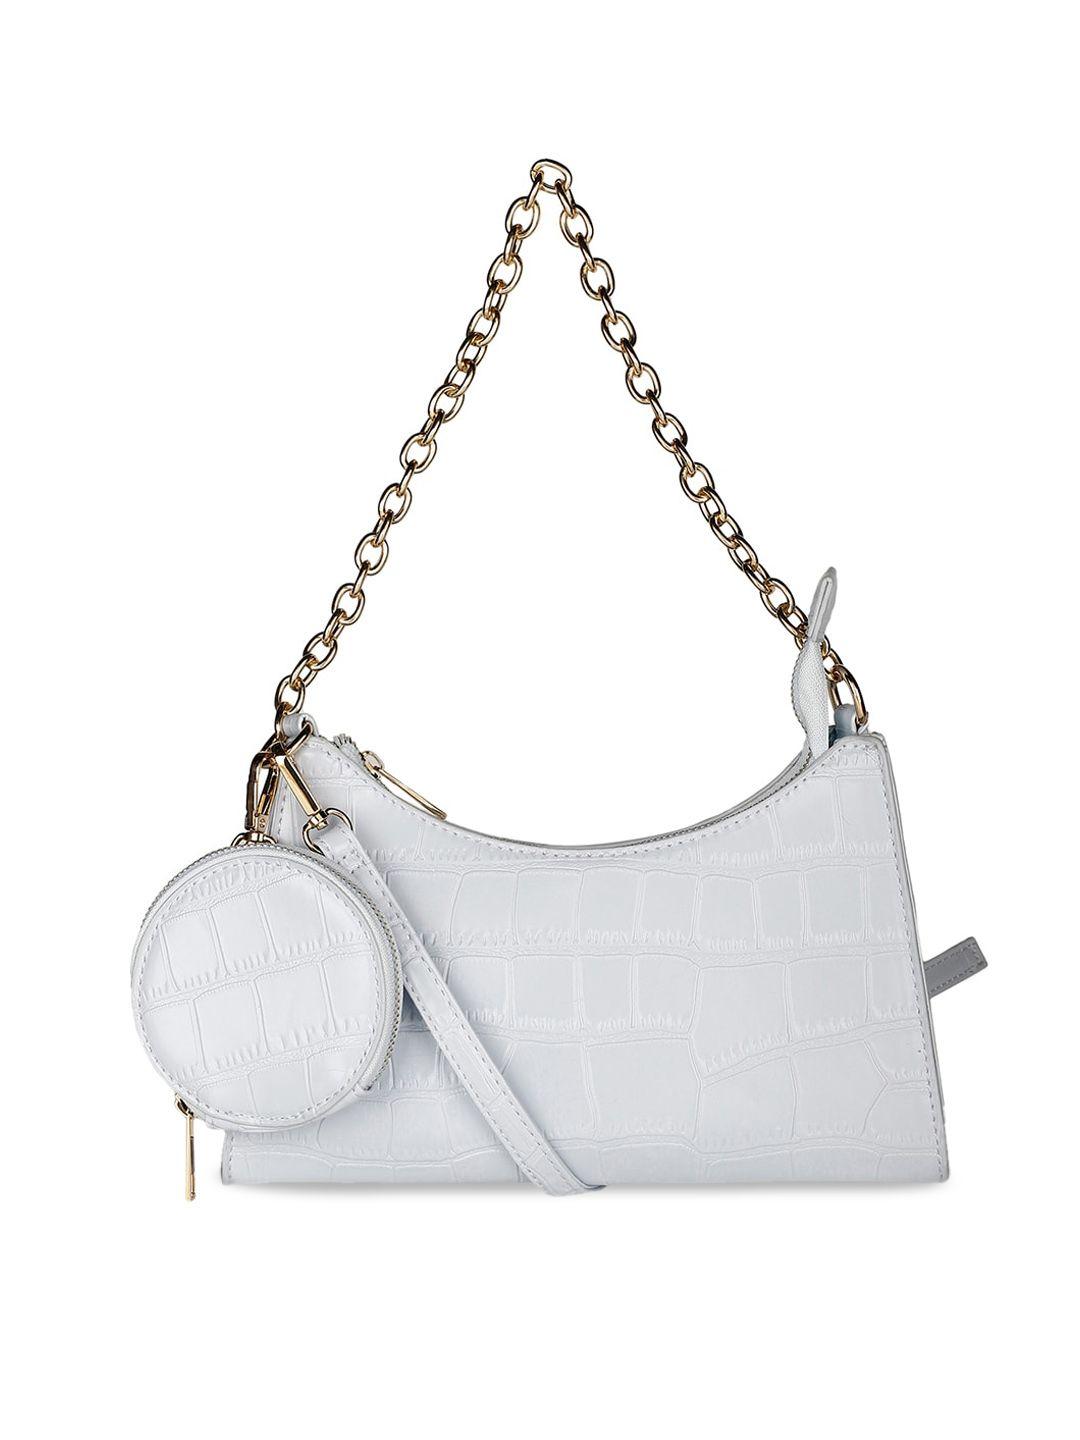 marie claire white & gold-toned textured structured shoulder bag